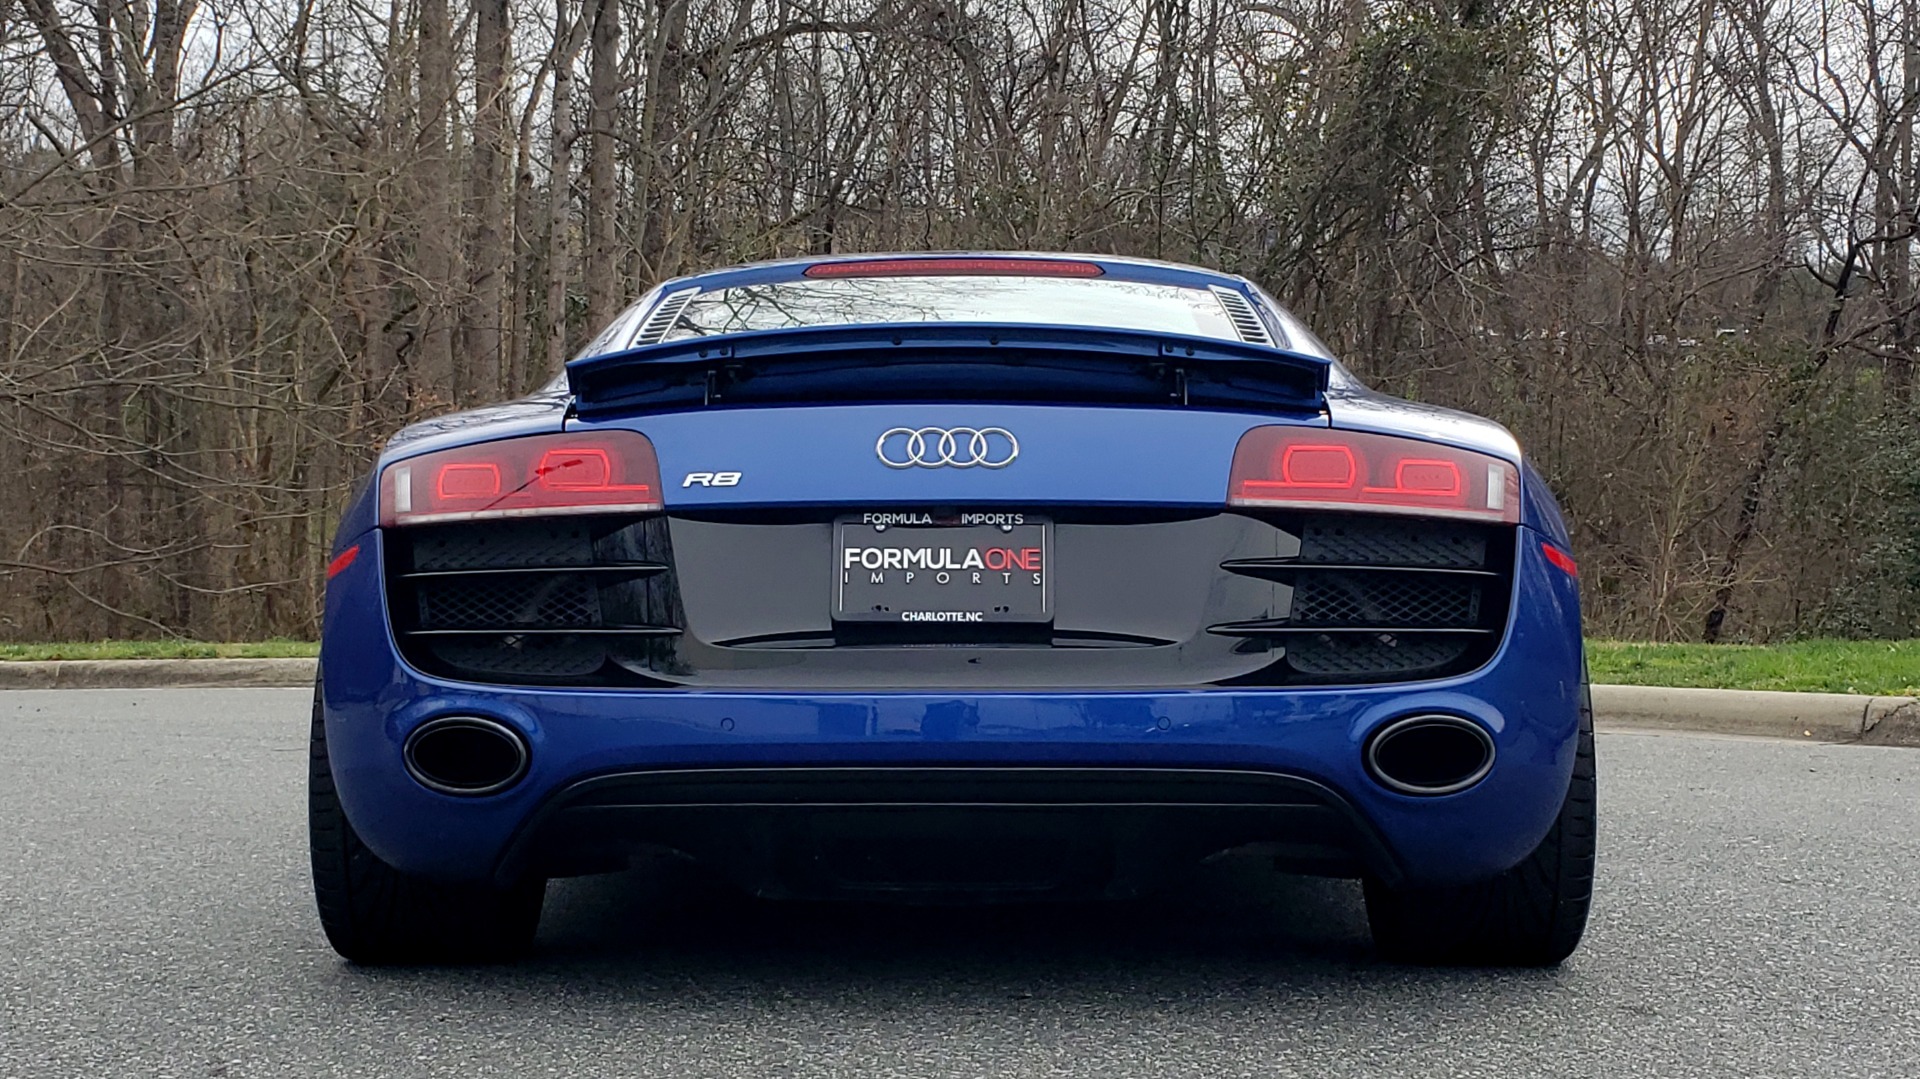 Used 2010 Audi R8 5.2L V10 / AWD / COUPE / NAV / 6-SPD AUTO / CUSTOM WHEELS for sale Sold at Formula Imports in Charlotte NC 28227 56